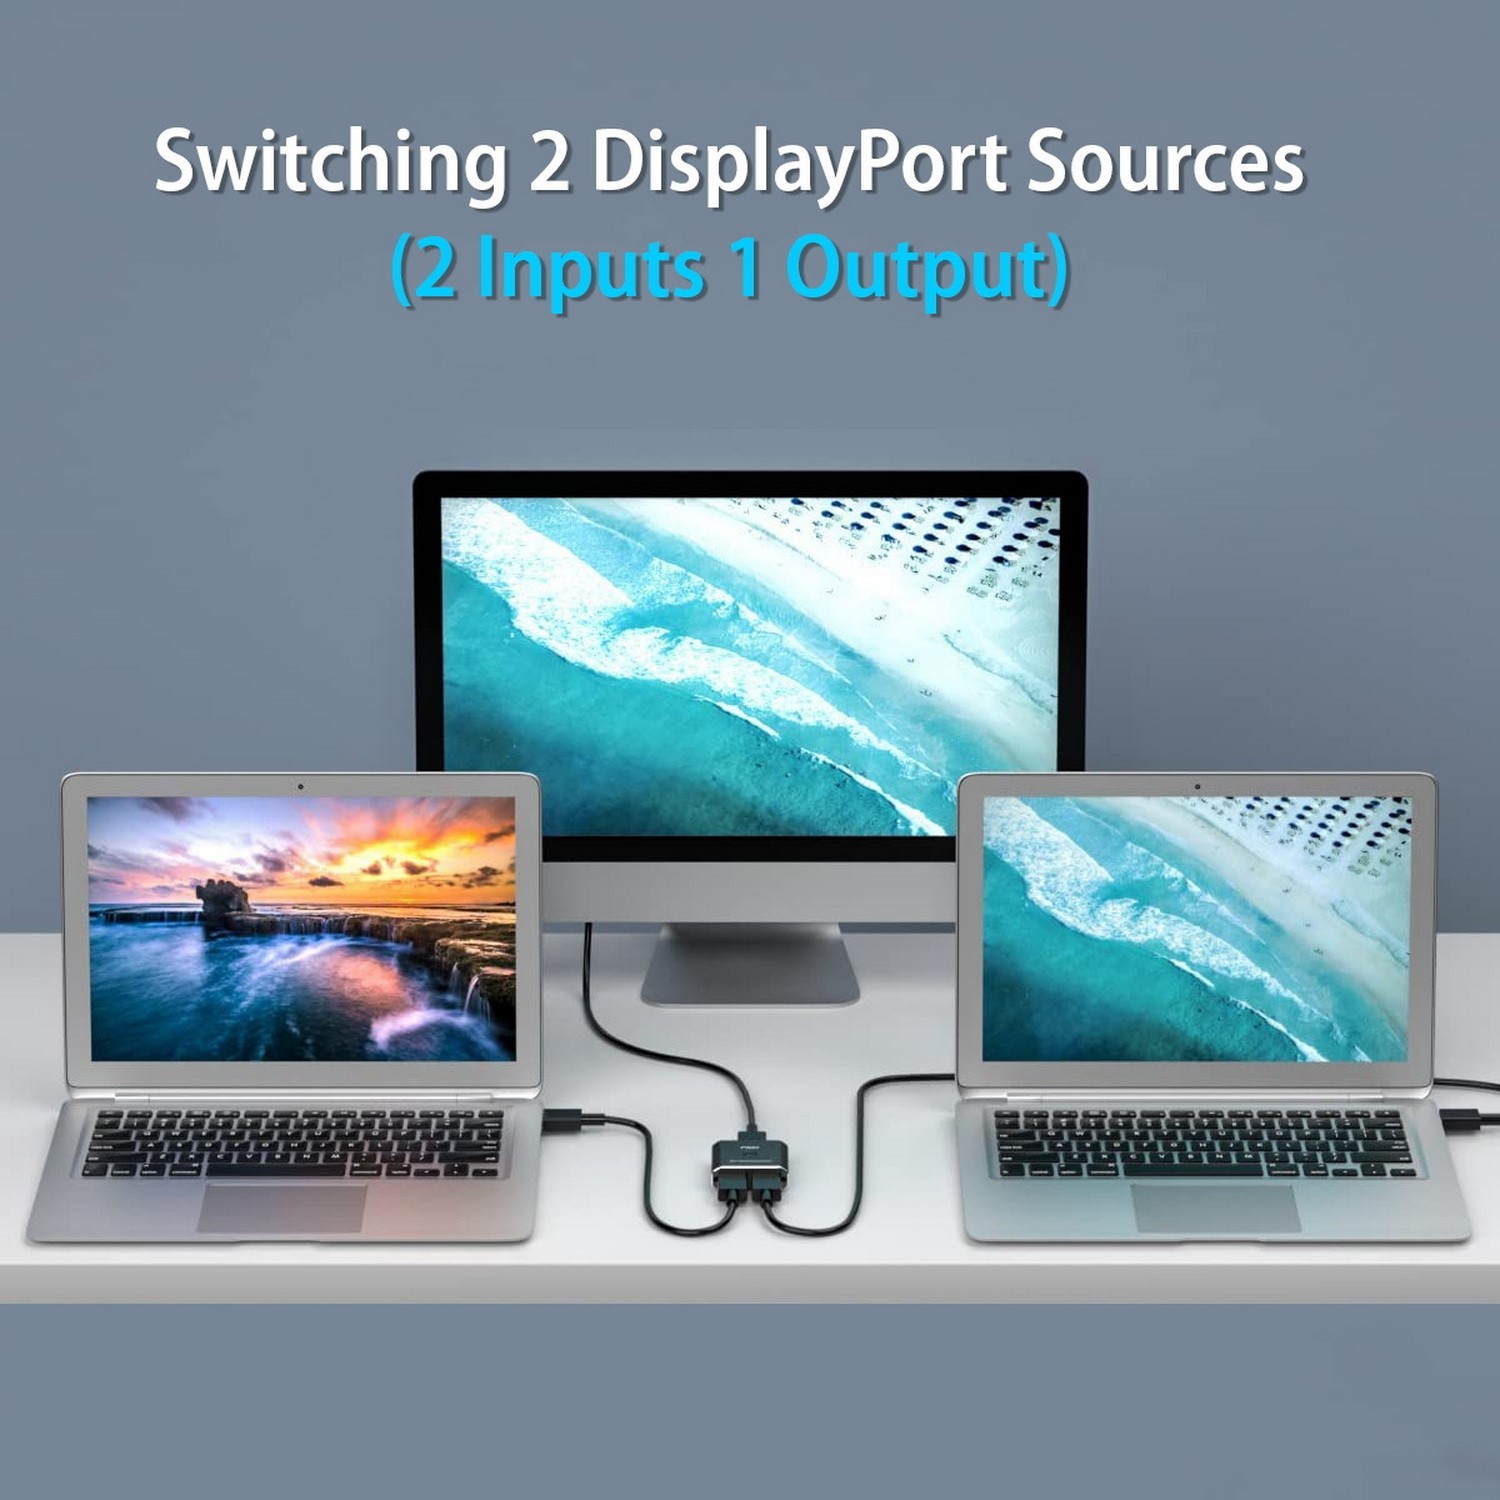 A large marketing image providing additional information about the product Simplecom CM202 Bi-Directional 2 Way DisplayPort 1.4 8K Switch Selector - Additional alt info not provided